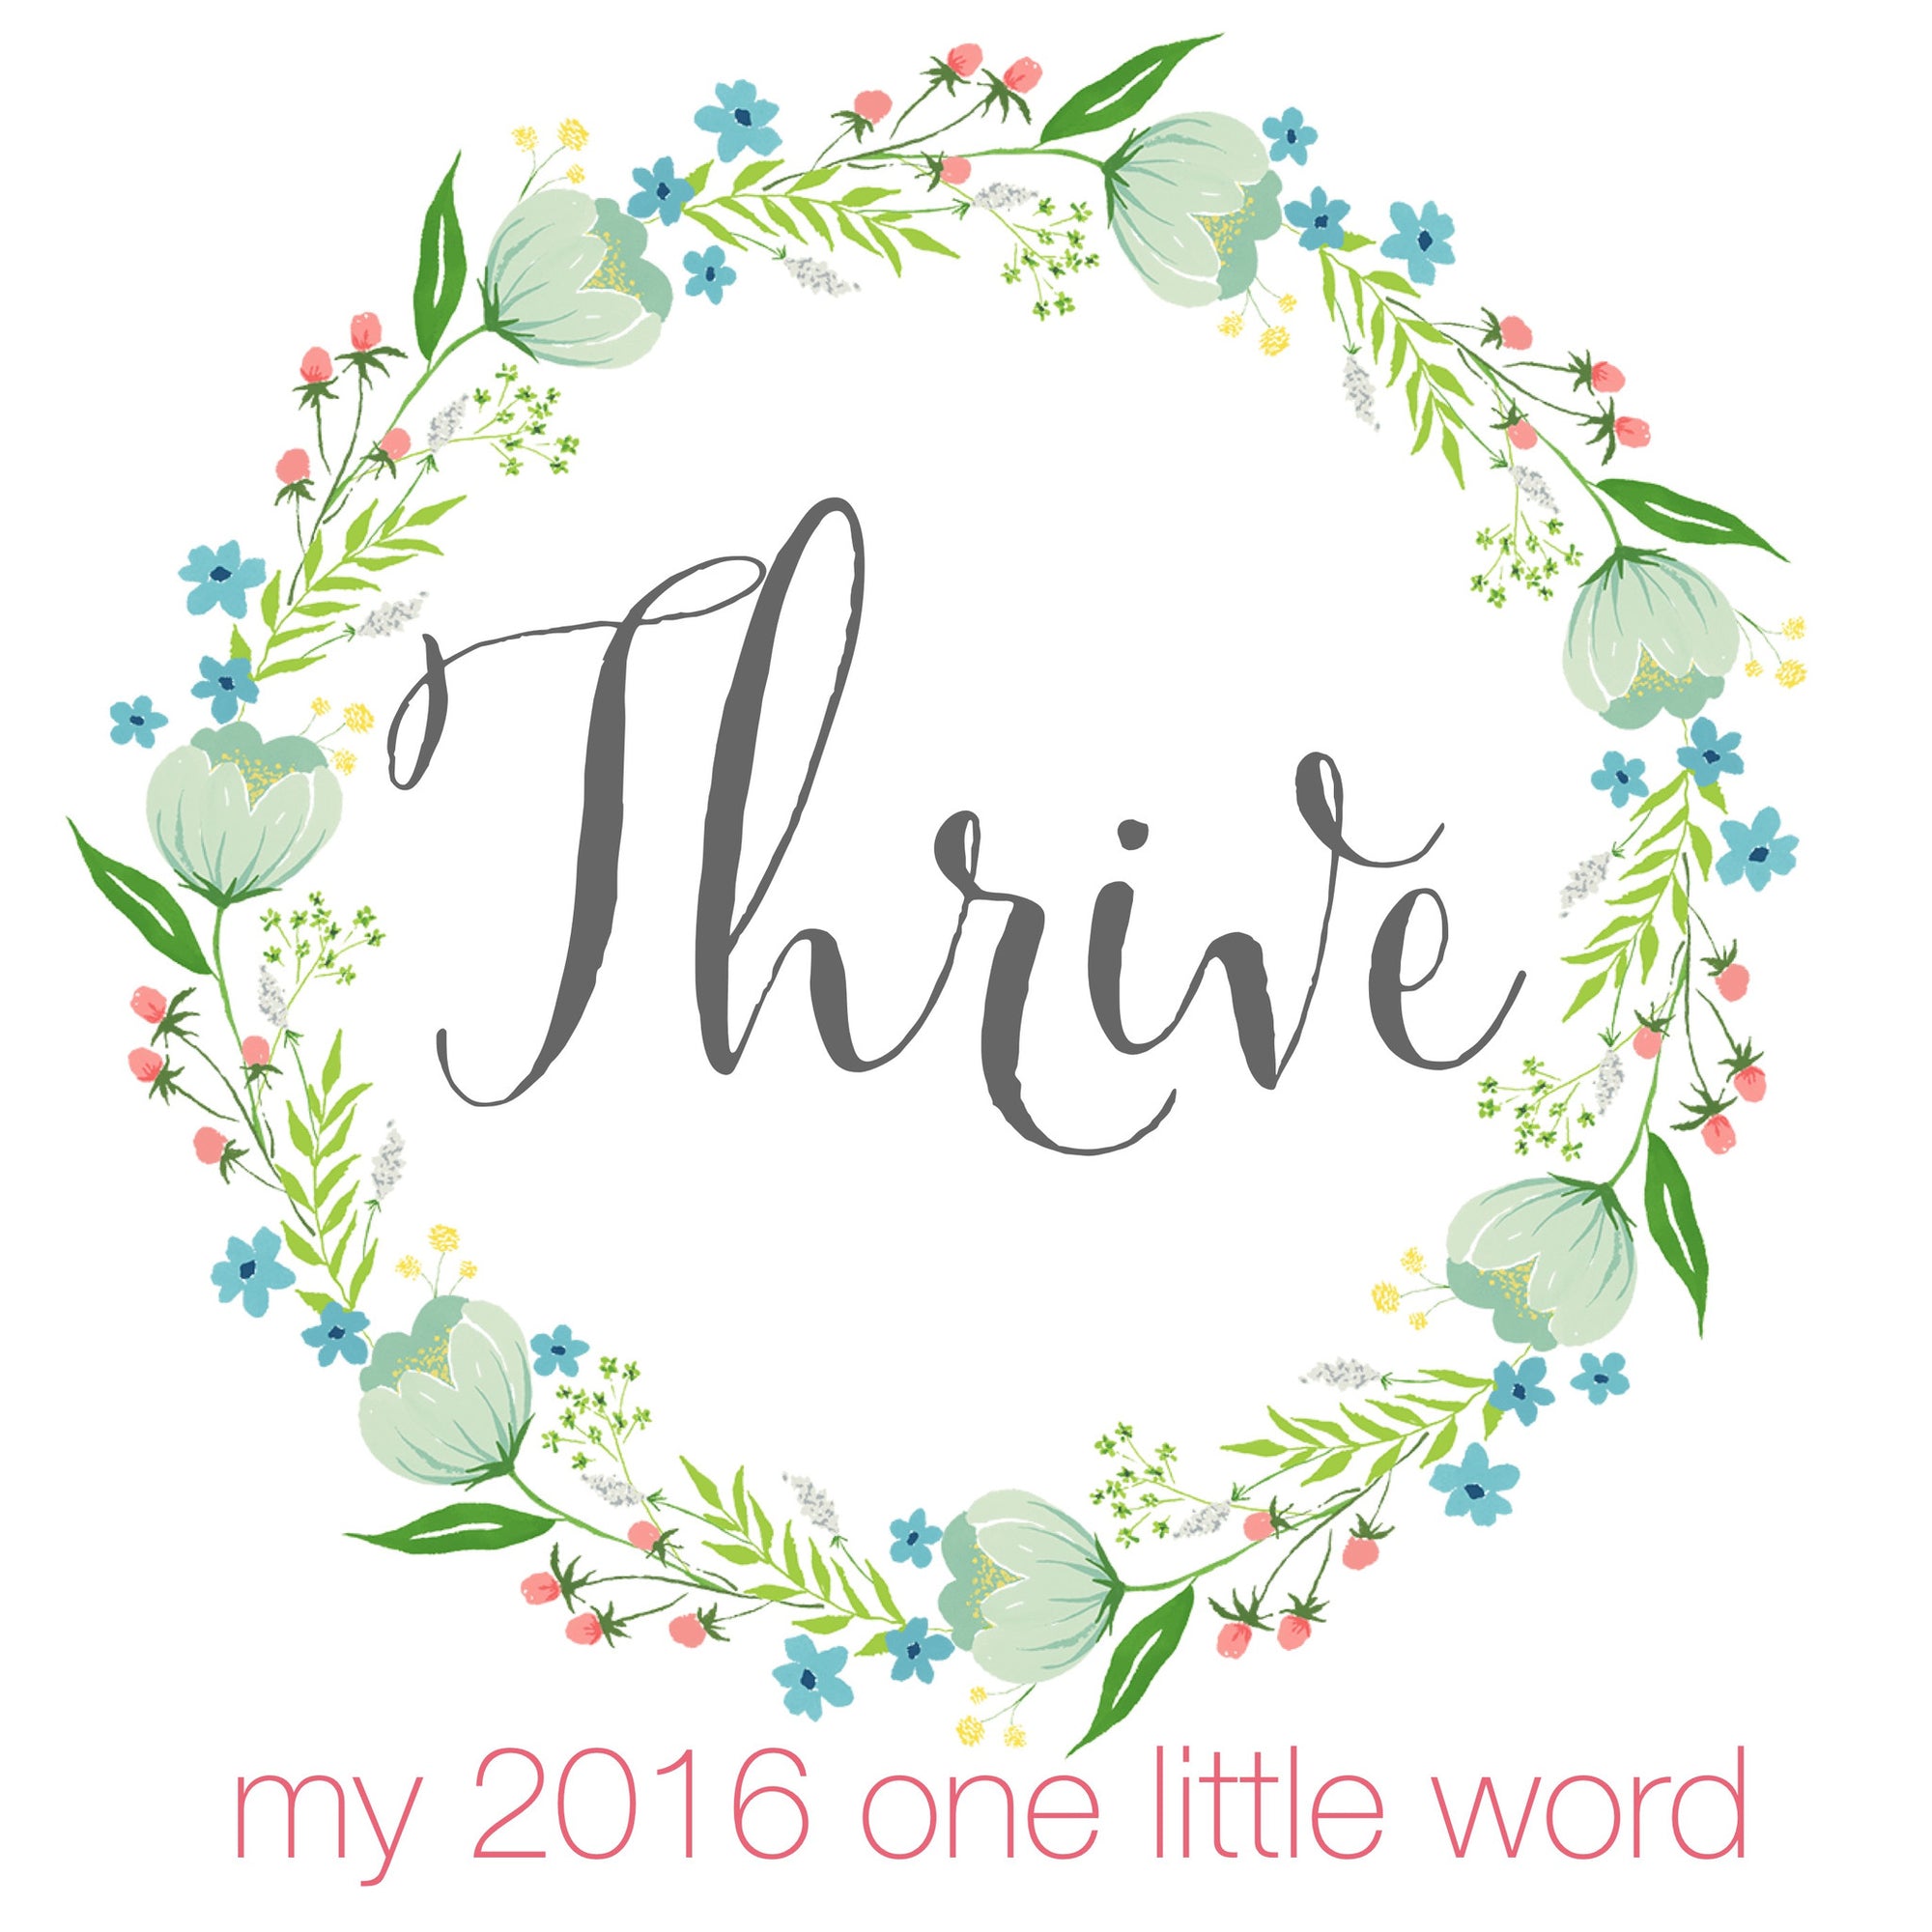 Thrive: My One Little Word for 2016